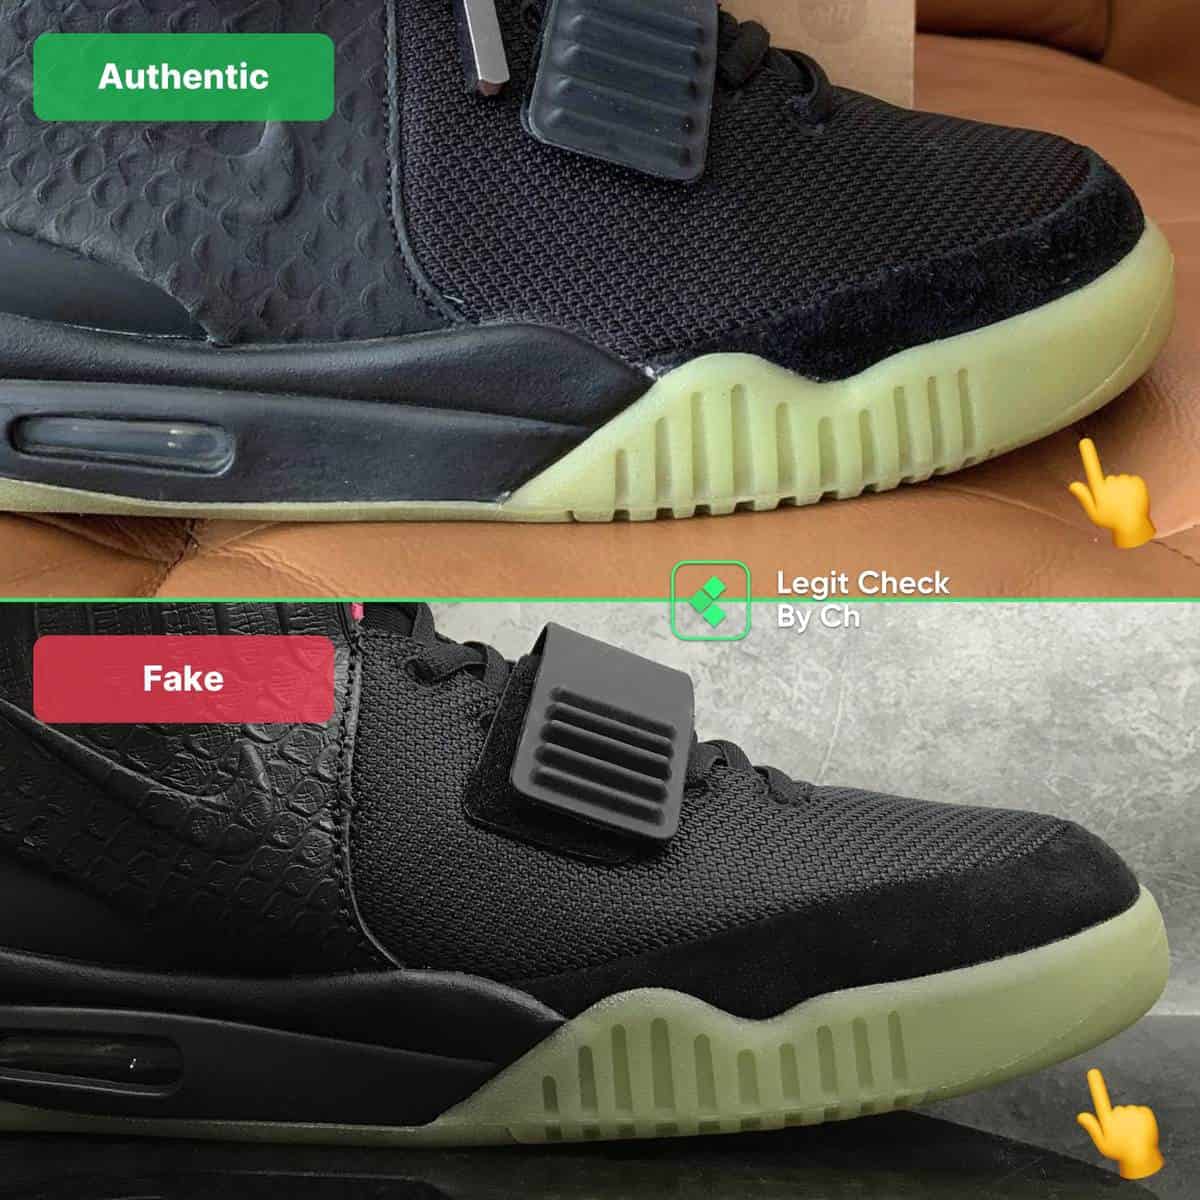 To Spot Fake Nike Air Yeezy Solar Red NRG Legit Check By